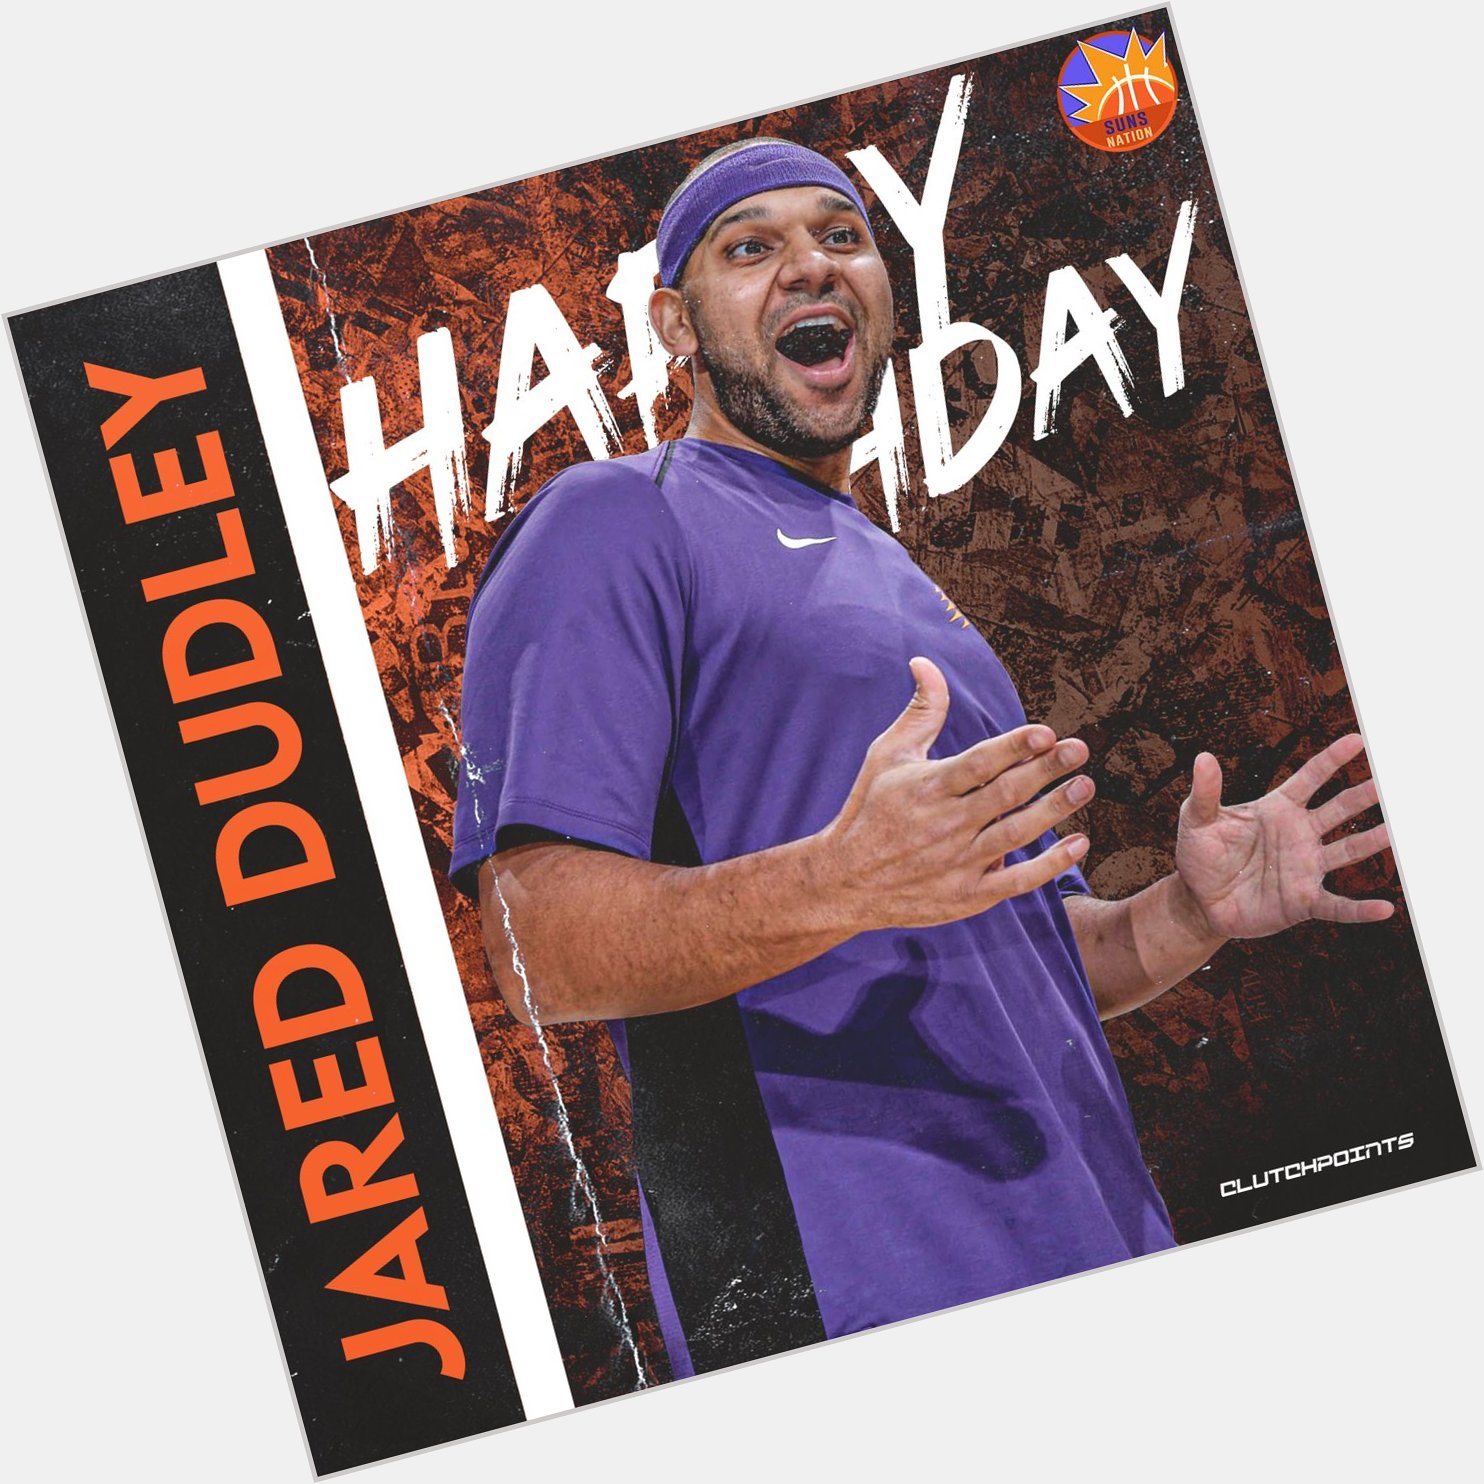 Suns nation, Let us all greet Jared Dudley a very happy birthday! 